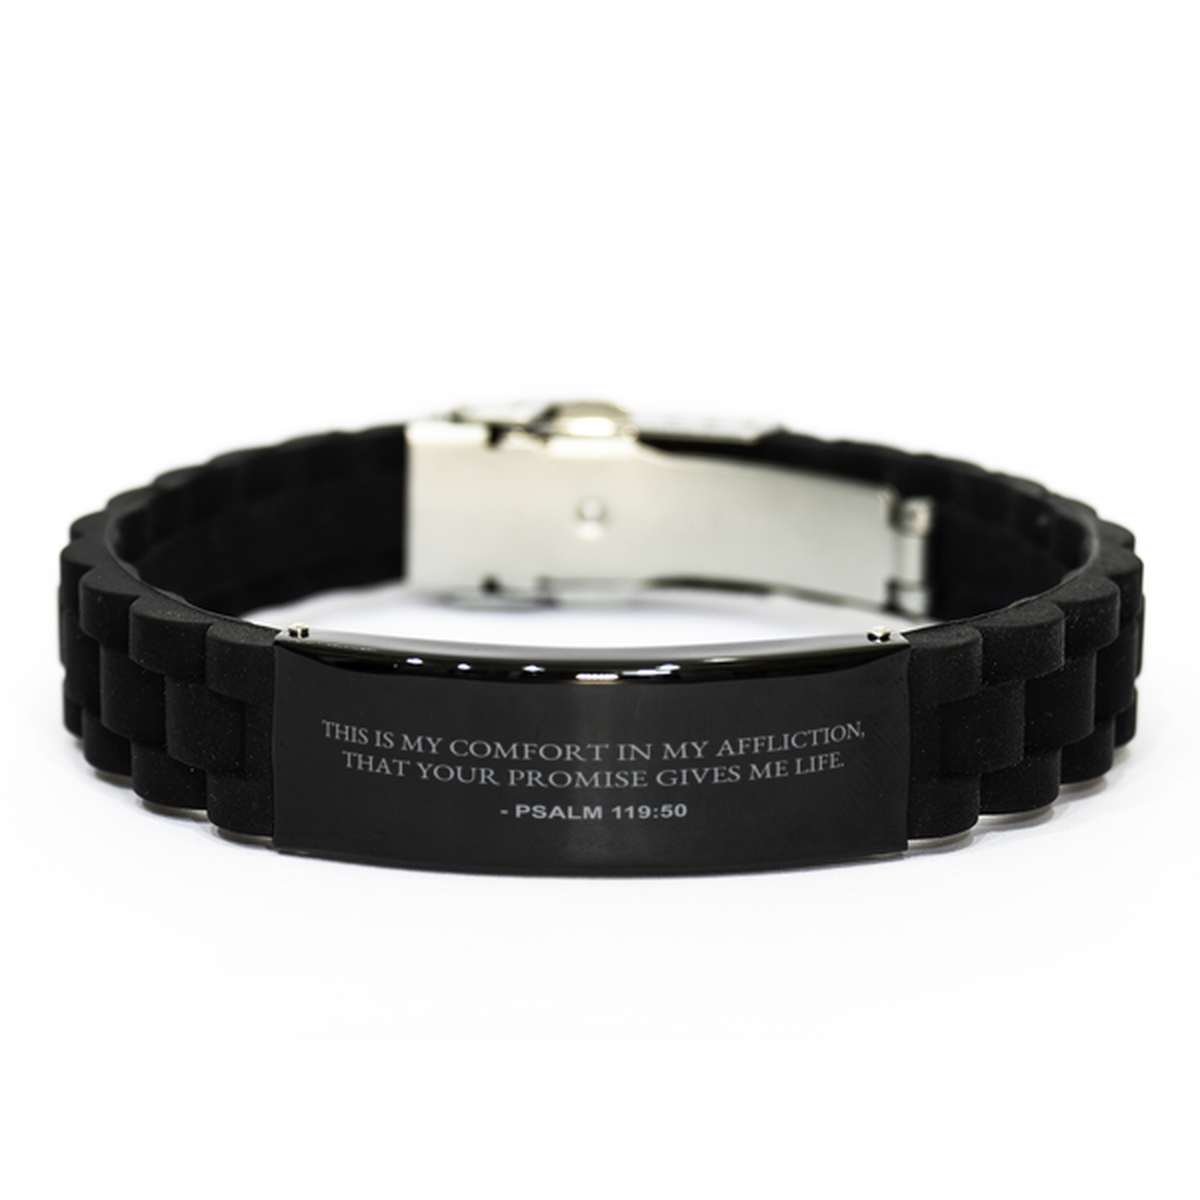 Bible Verse Black Bracelet,, Psalm 119:50 This Is My Comfort In My Affliction, That Your, Inspirational Christian Gifts For Men Women